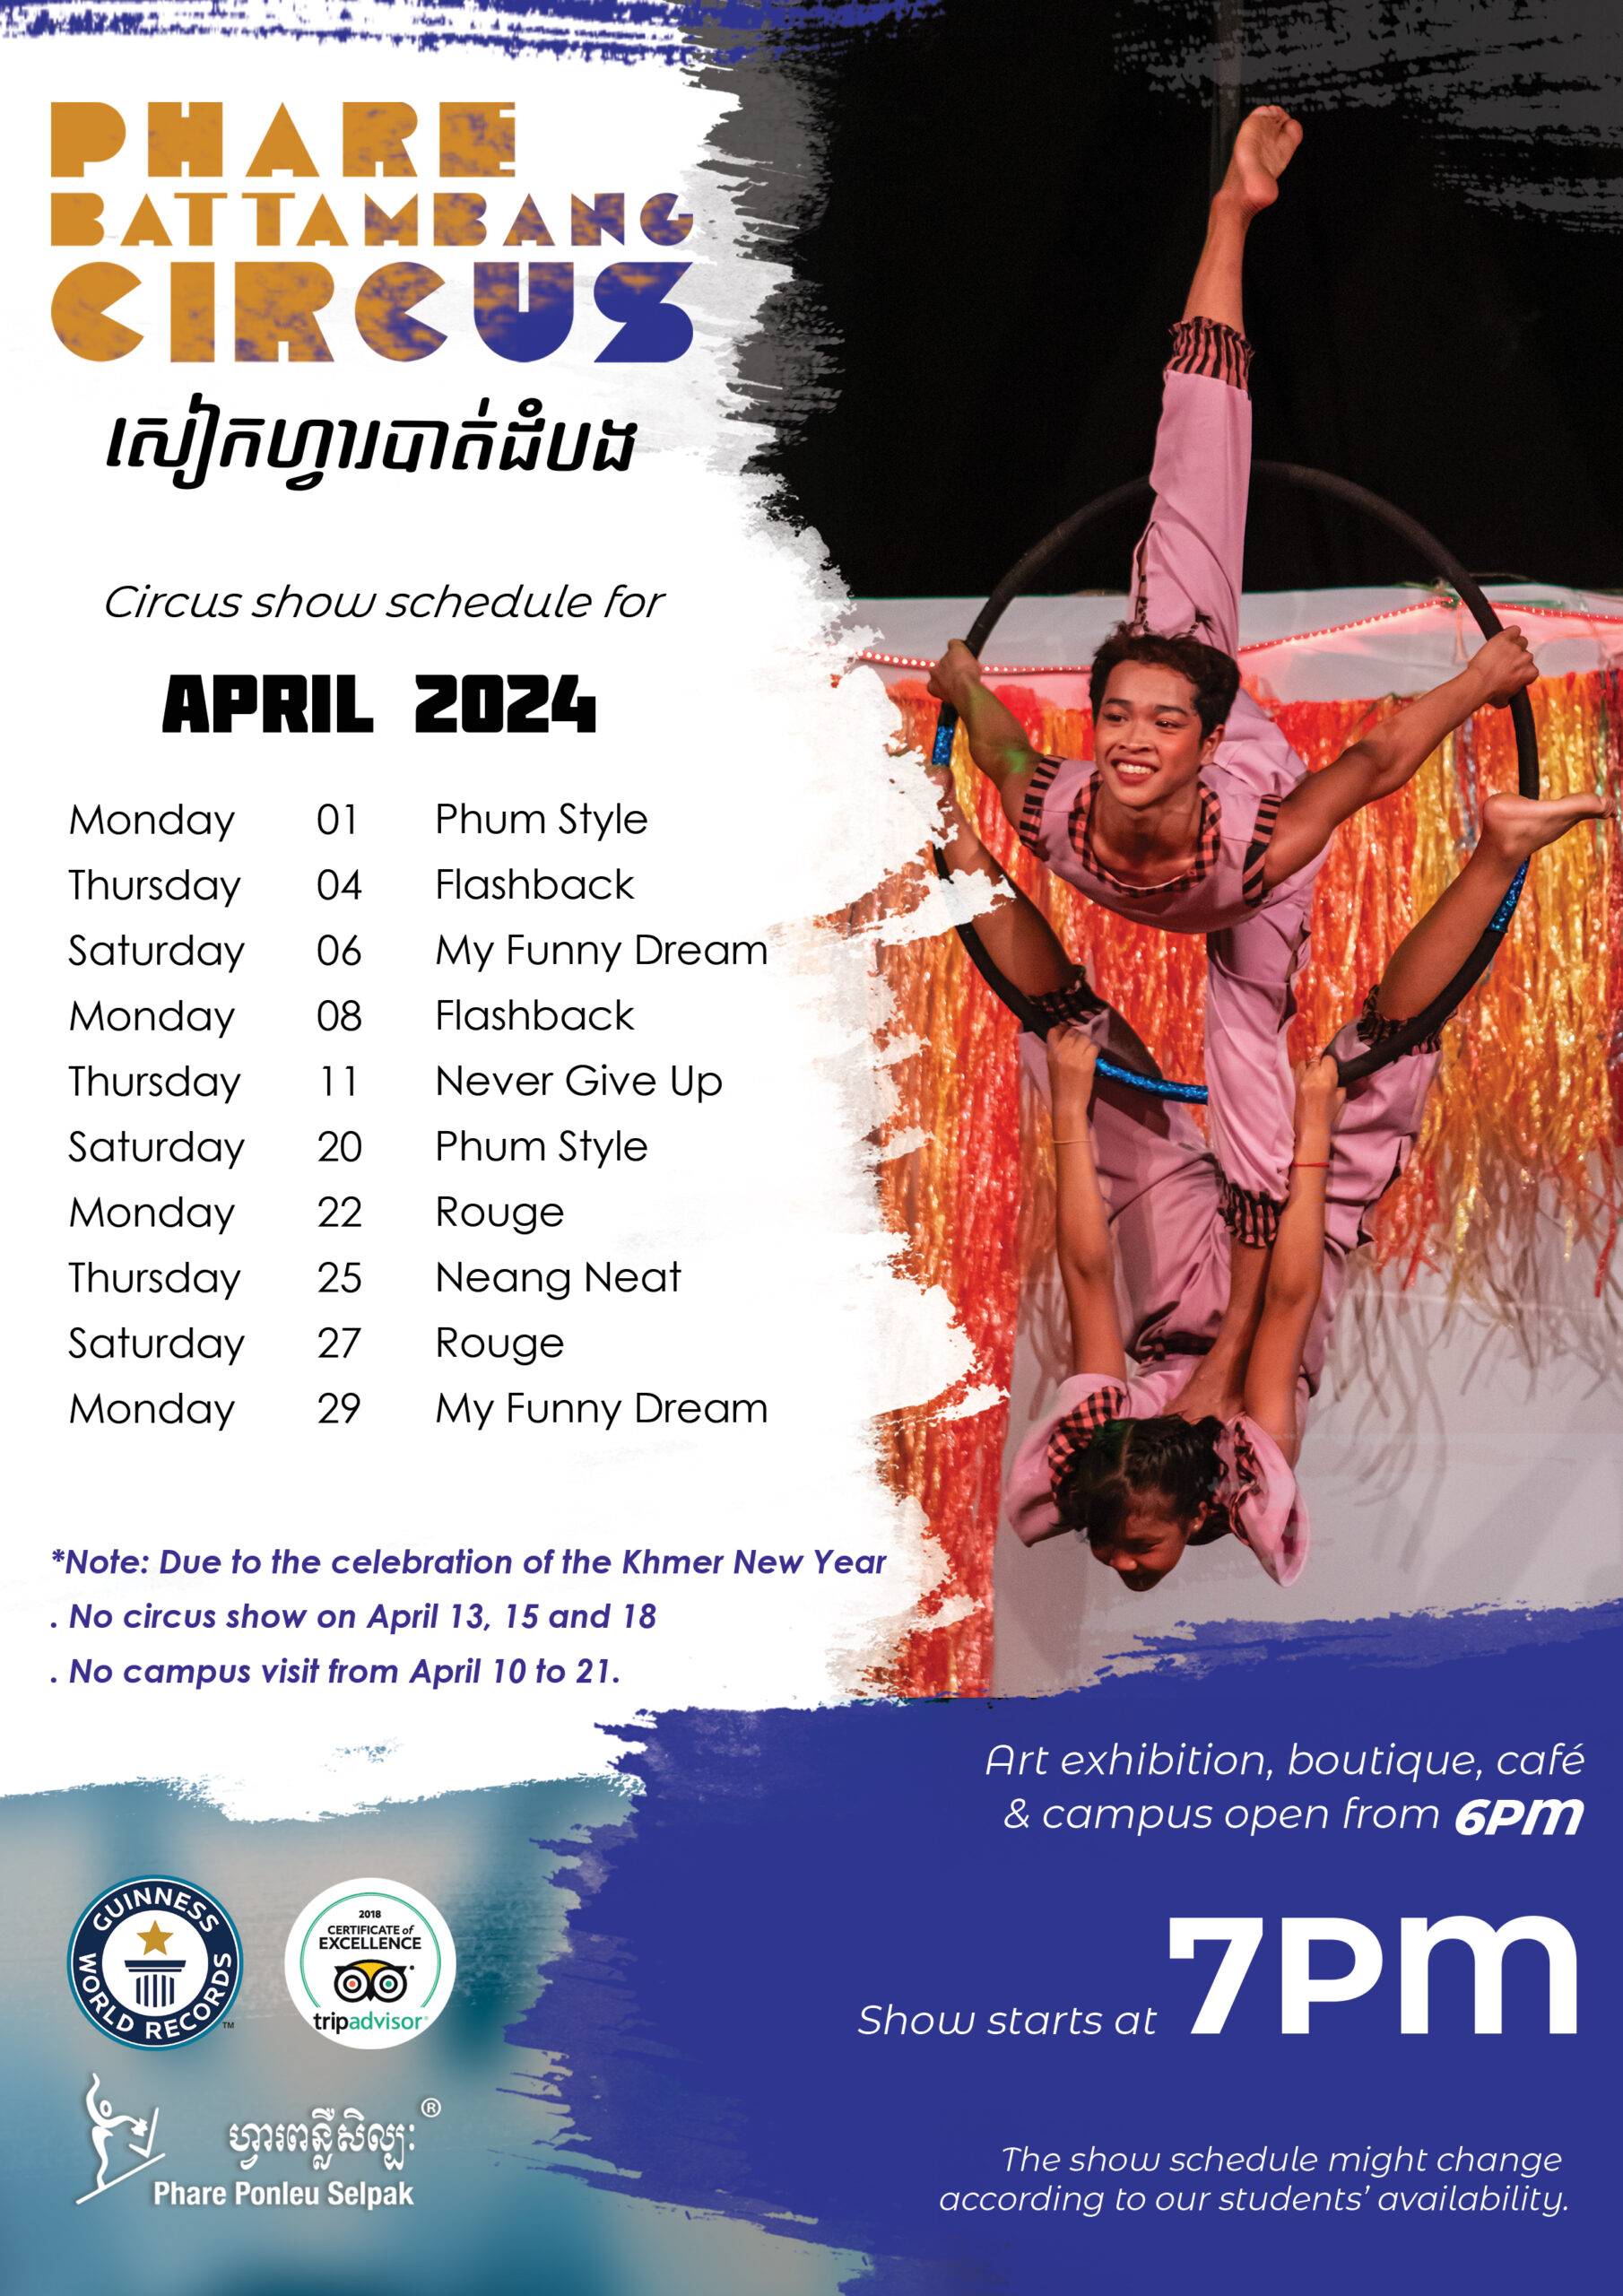 Phare Battambang Circus show schedule in March 2024 - English